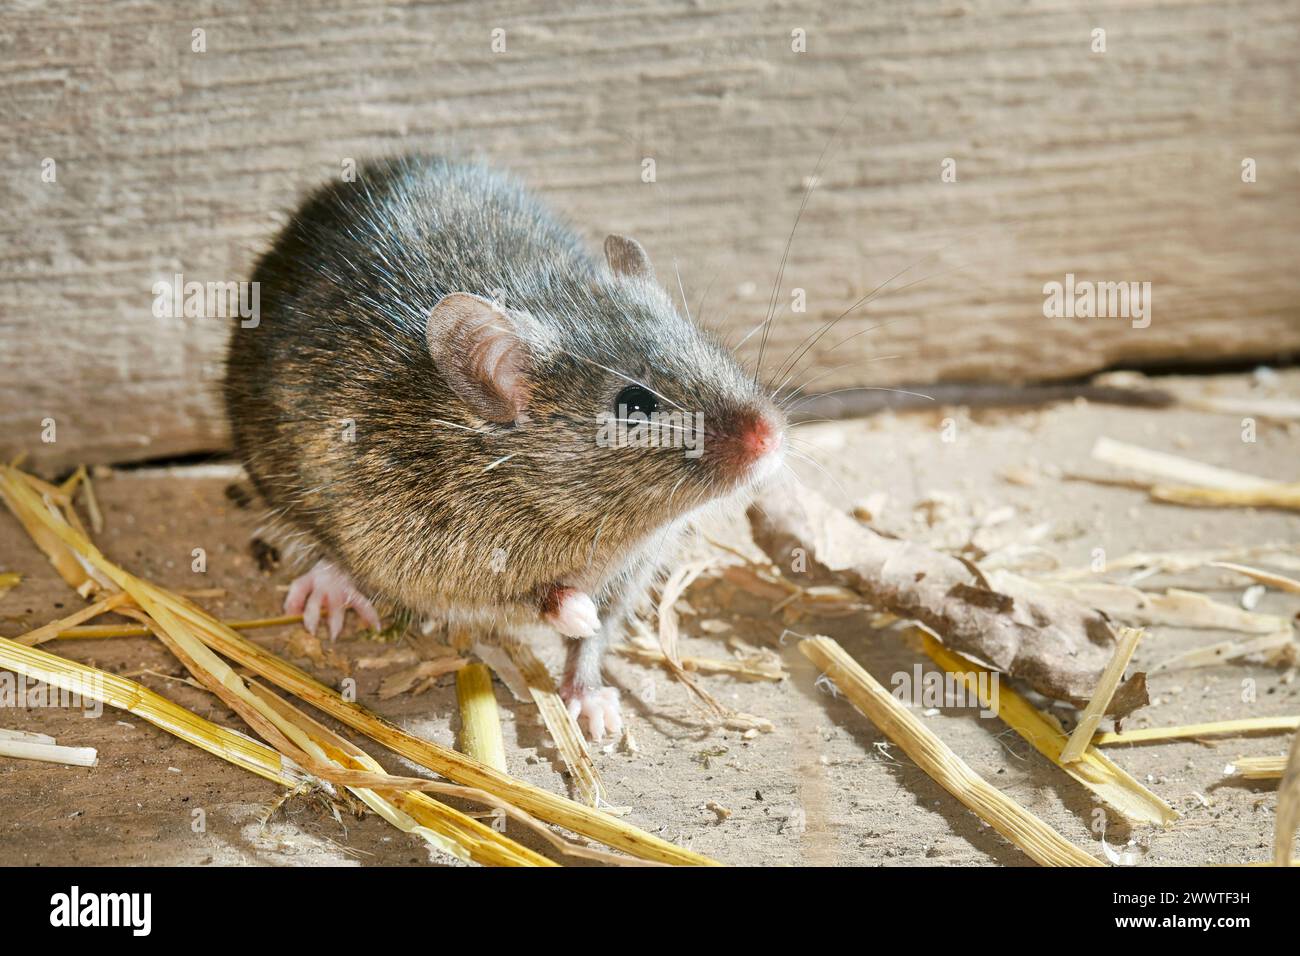 house mouse (Mus musculus), on a wooden floor with straw remains, Germany Stock Photo